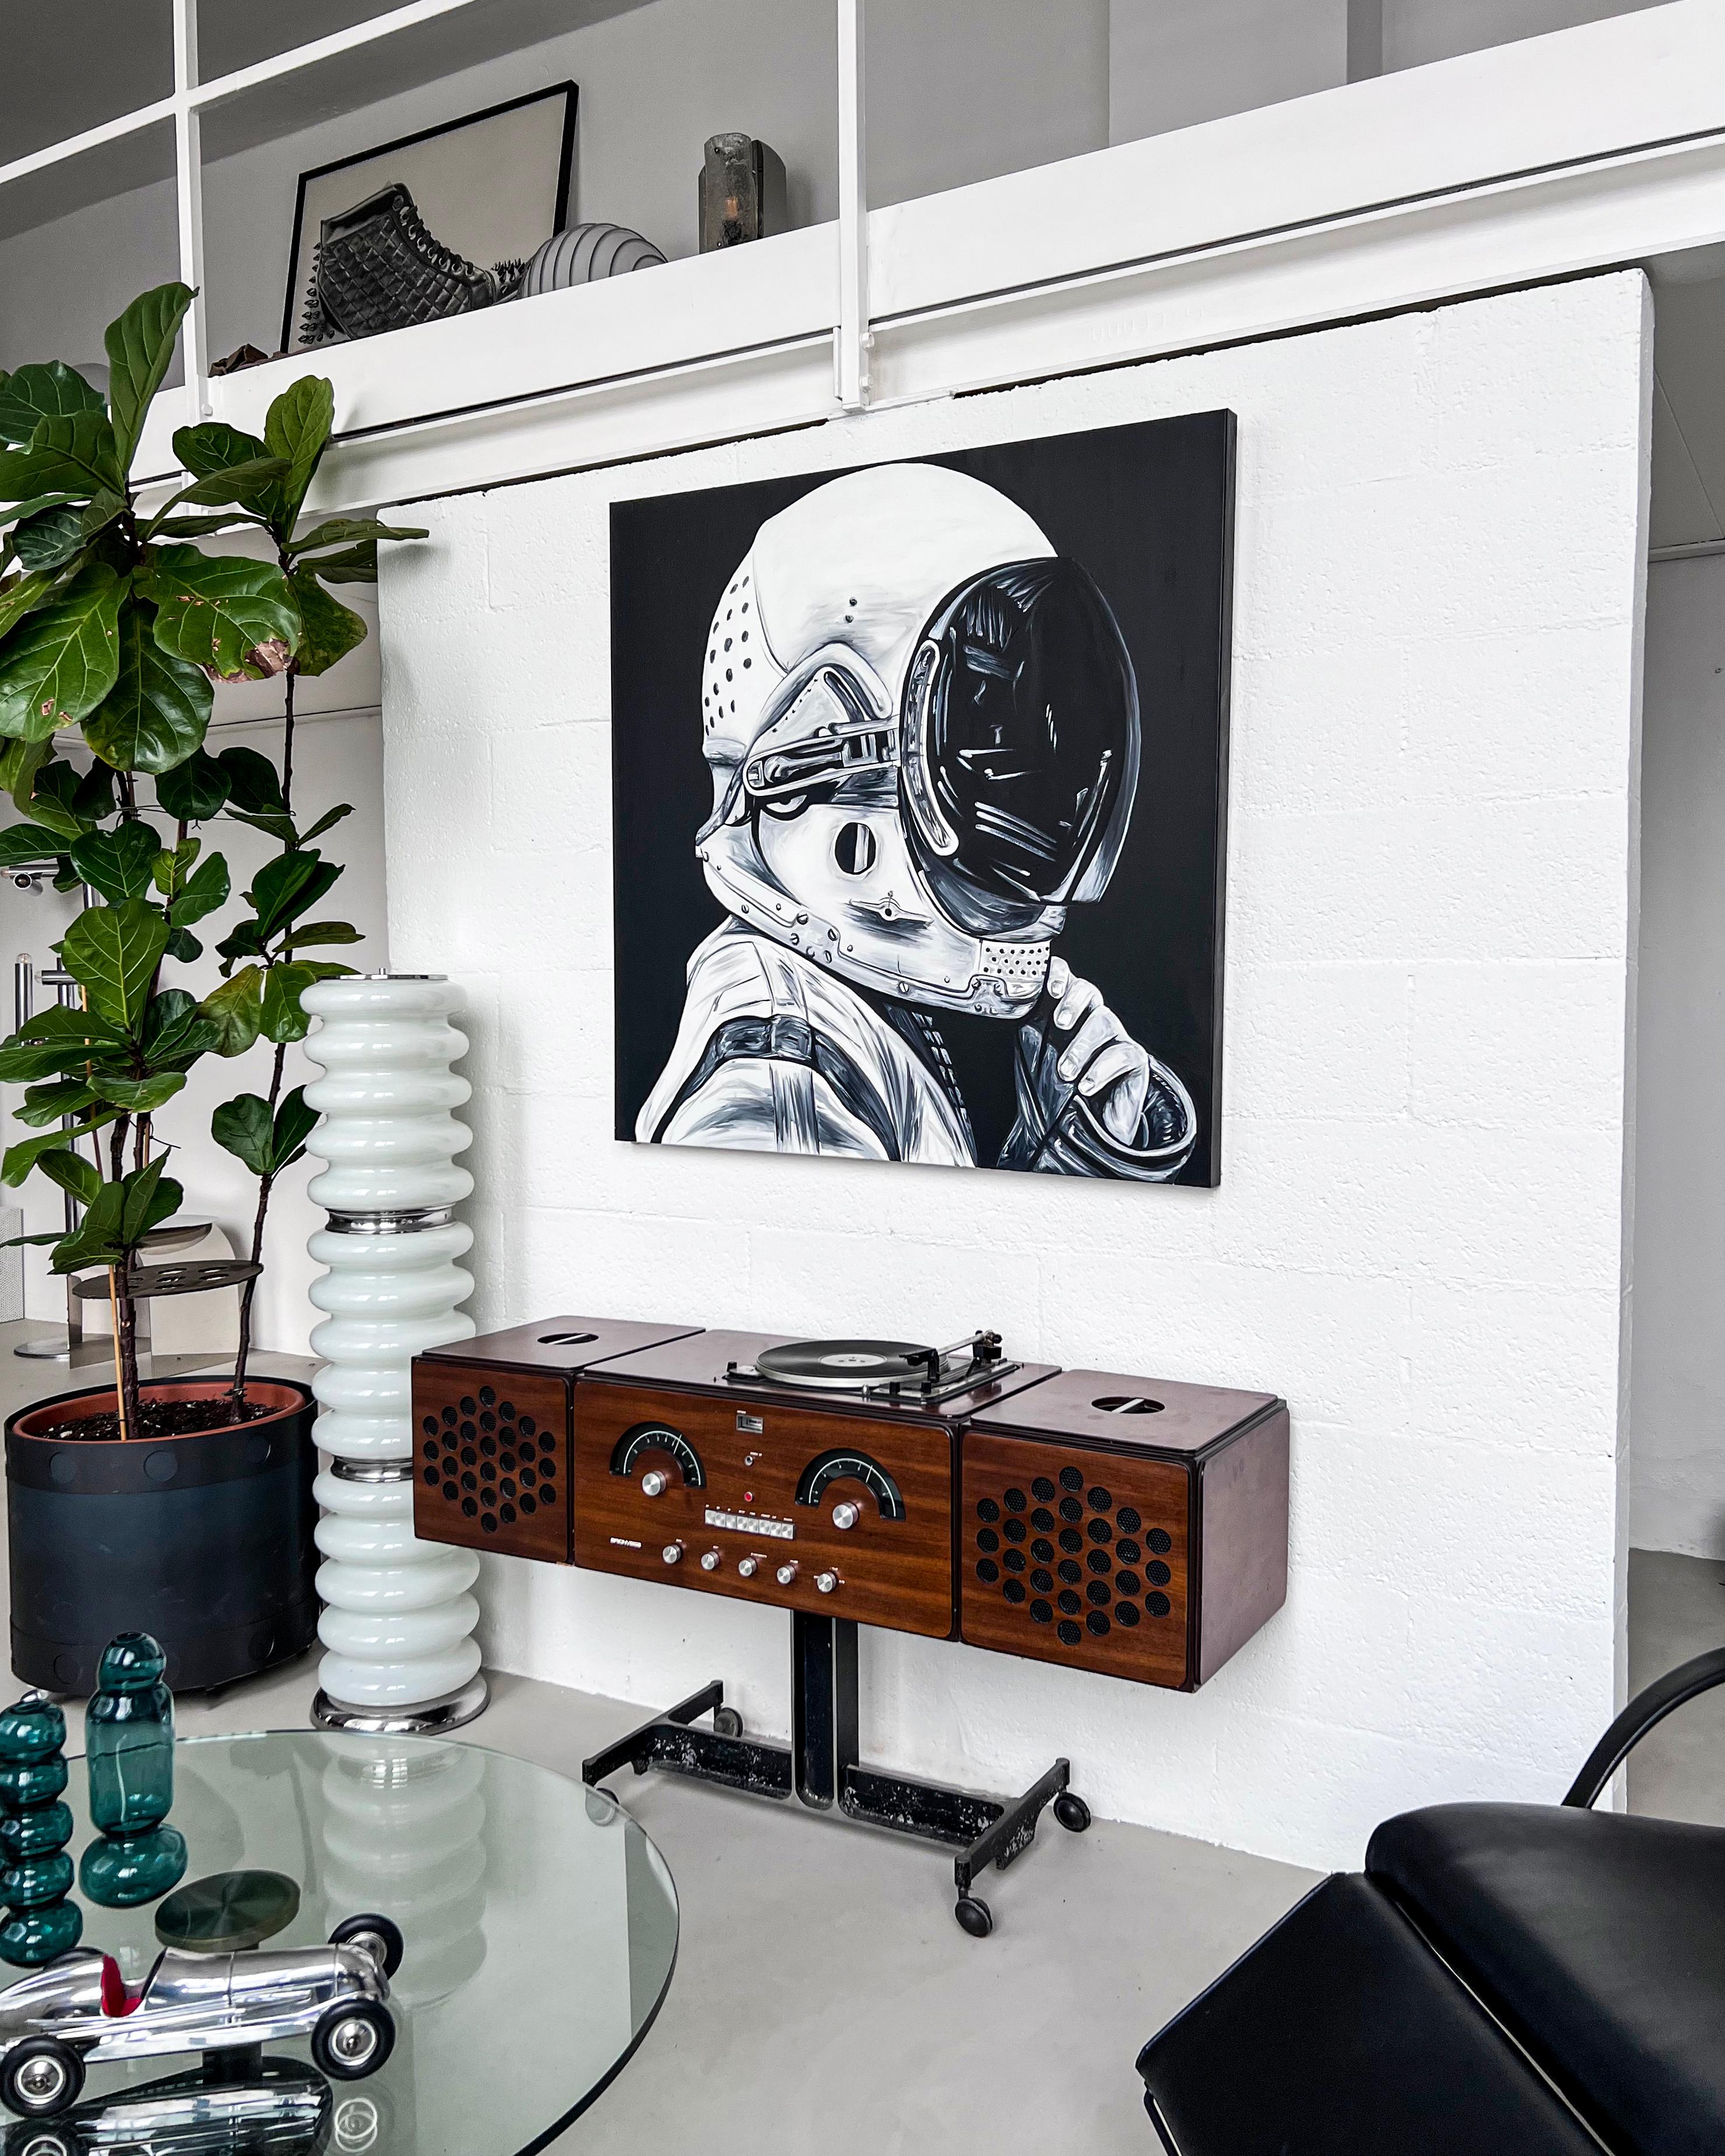 Black and white original painting (not a print), depicting a cosmonaut in his space suit and helmet. It is the work of Spanish artist Ricardo Rodriguez, and is a big canvas measuring one meter by one meter (40 x 40 inches). It is highly decorative